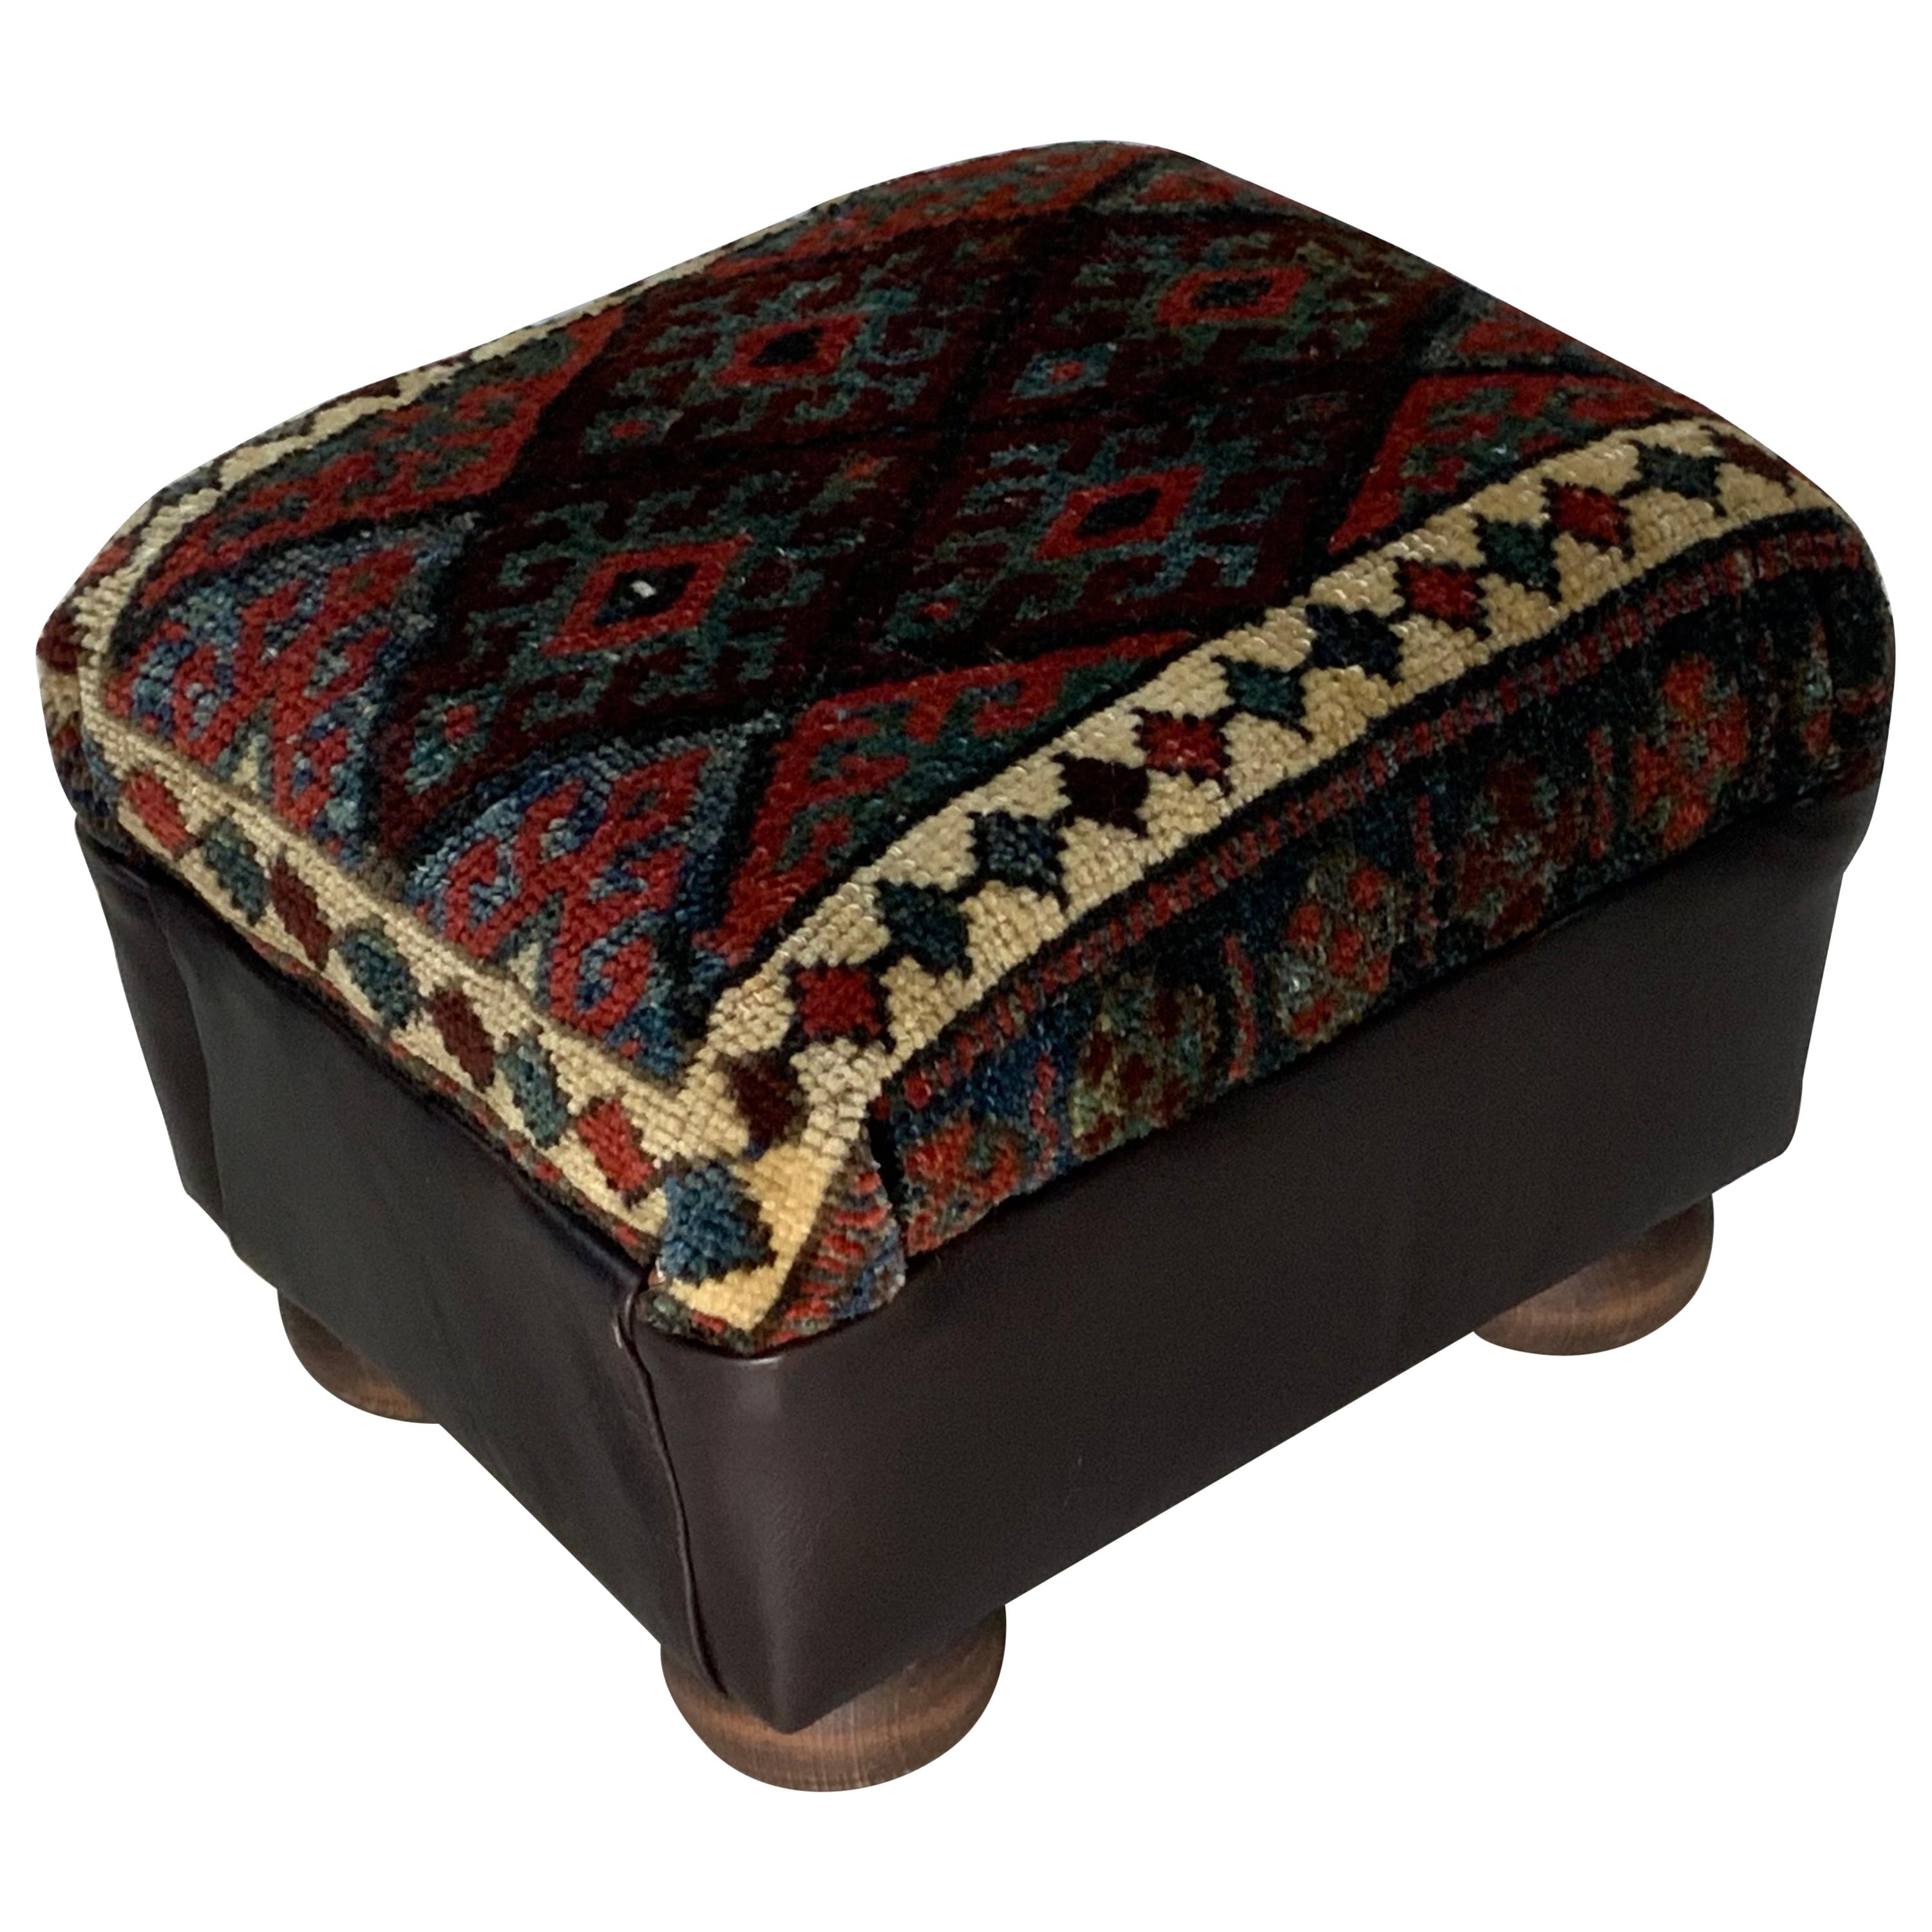 Antique Hand Woven Rug Upholstered Foot Stool